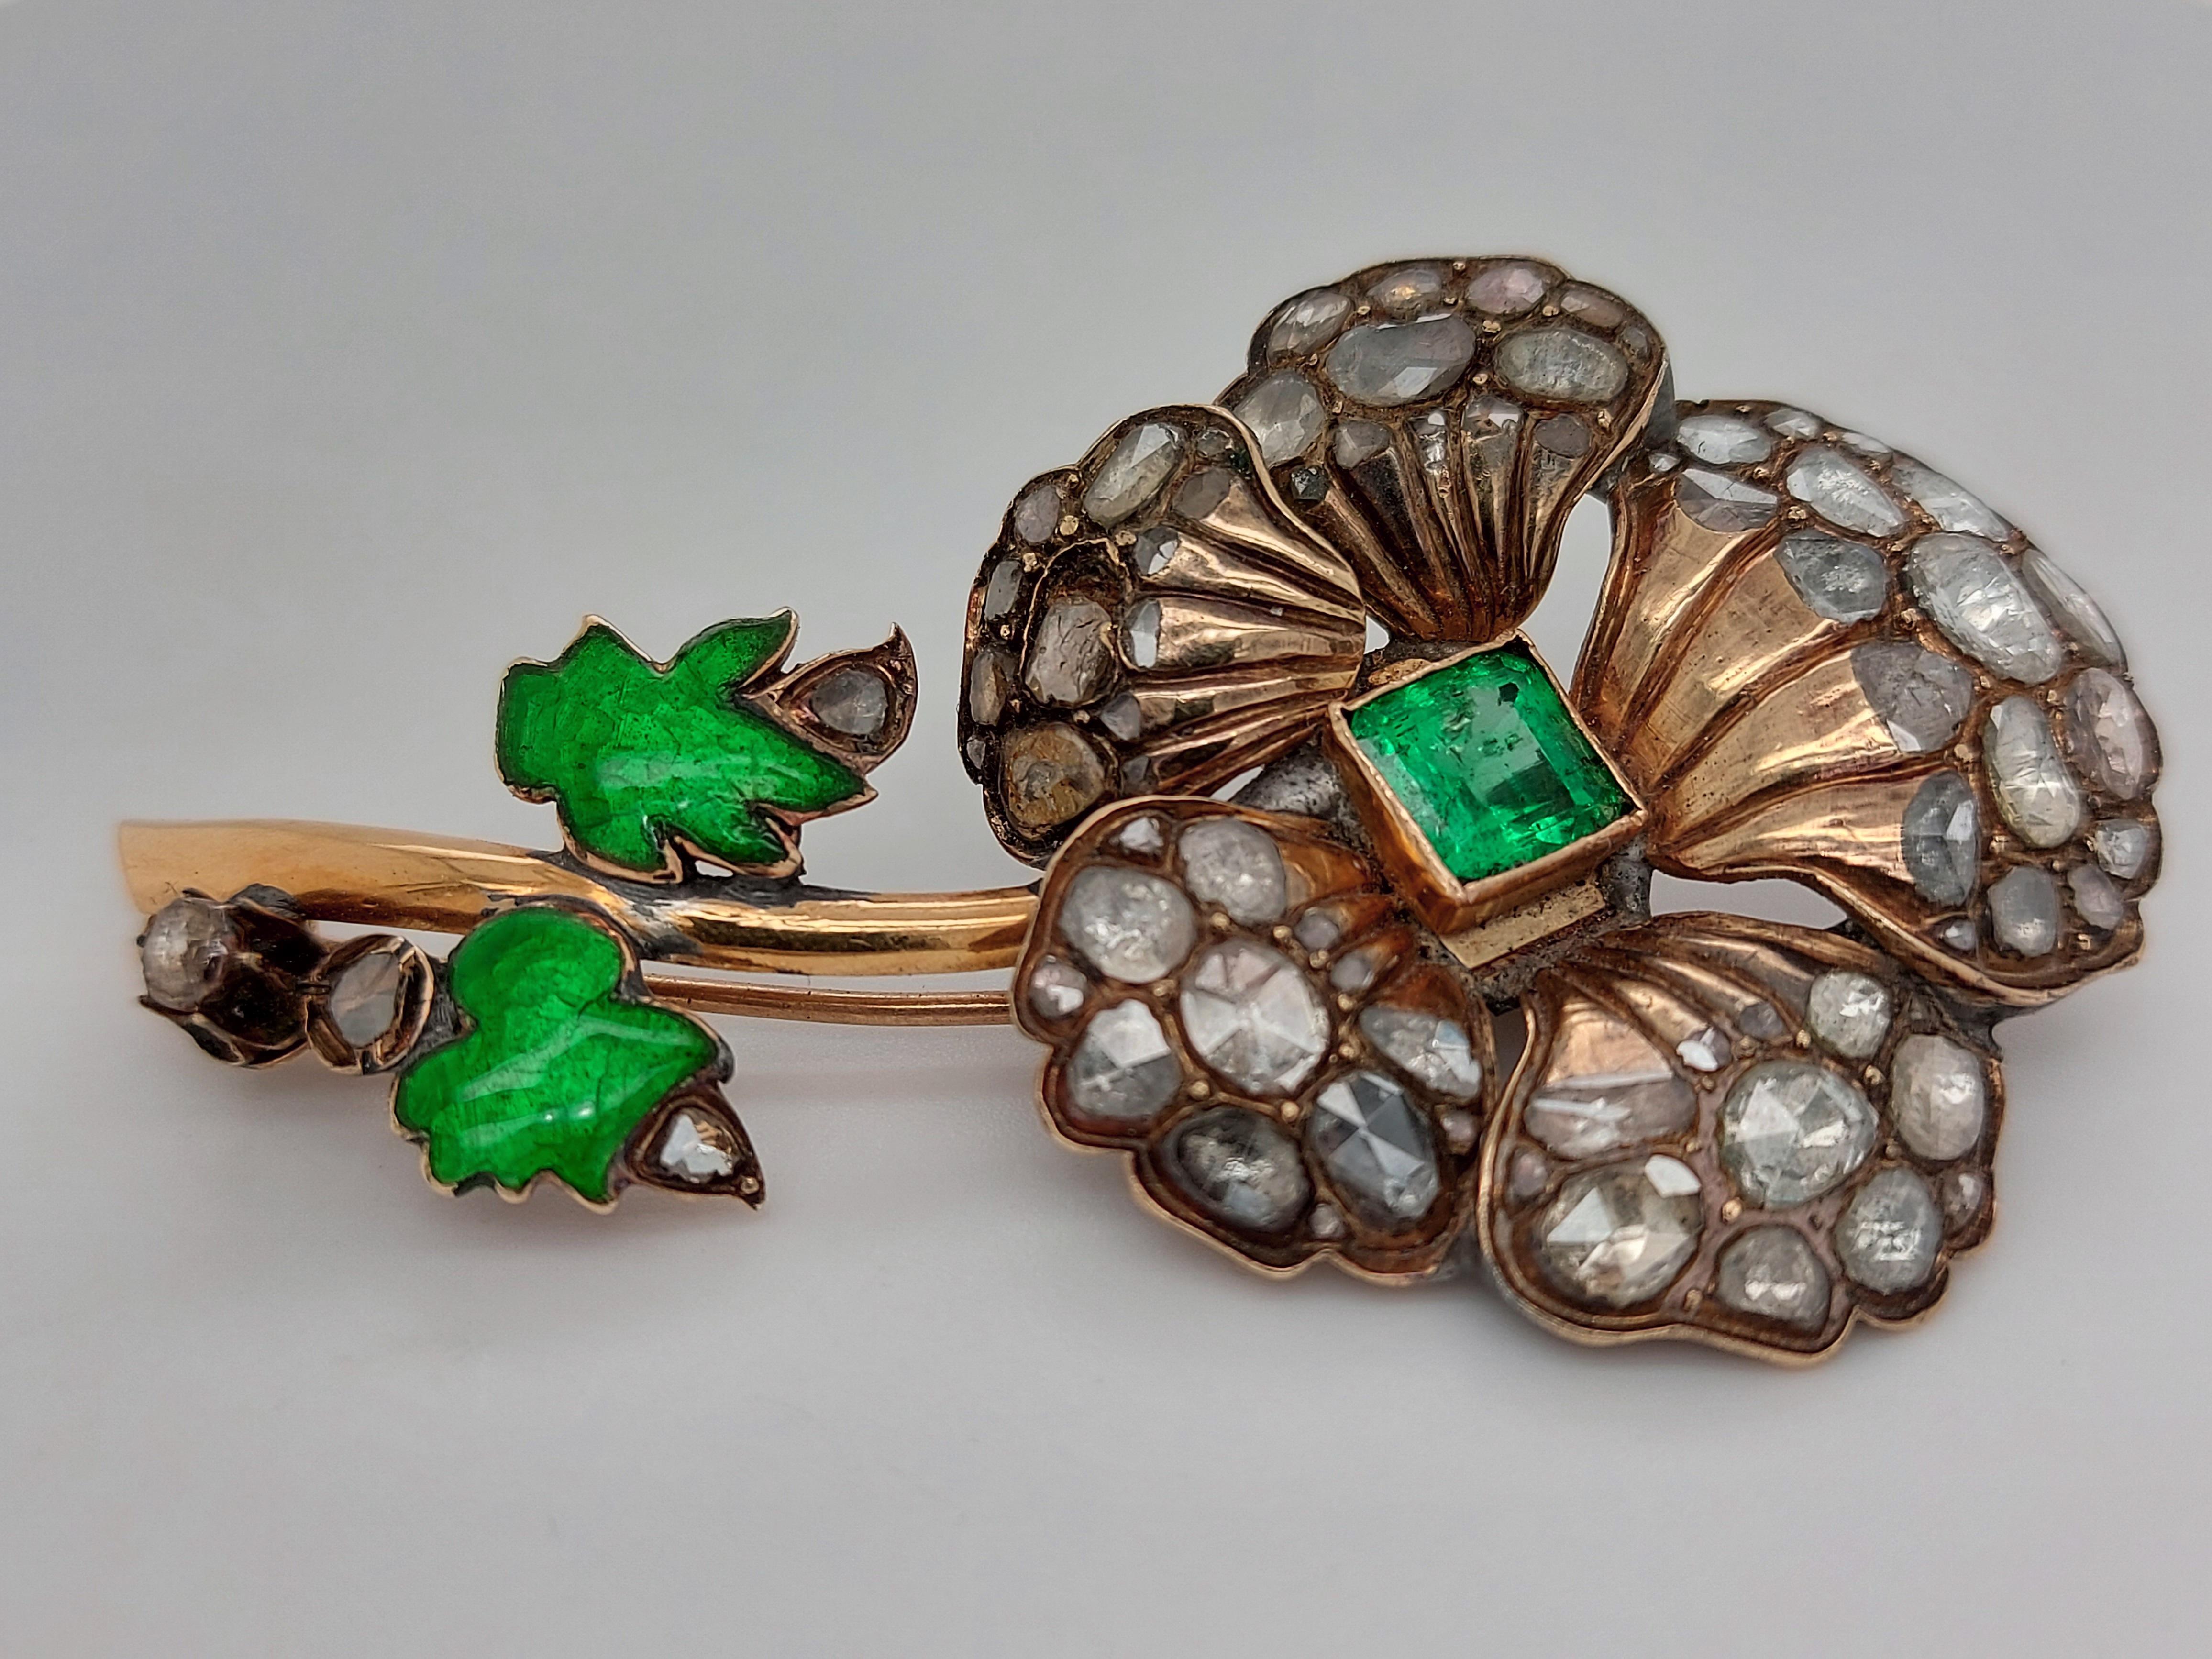 Silver and 14kt Gold Flower Brooch, Rose Cut Diamonds, Colombia Emerald, Enamel For Sale 2